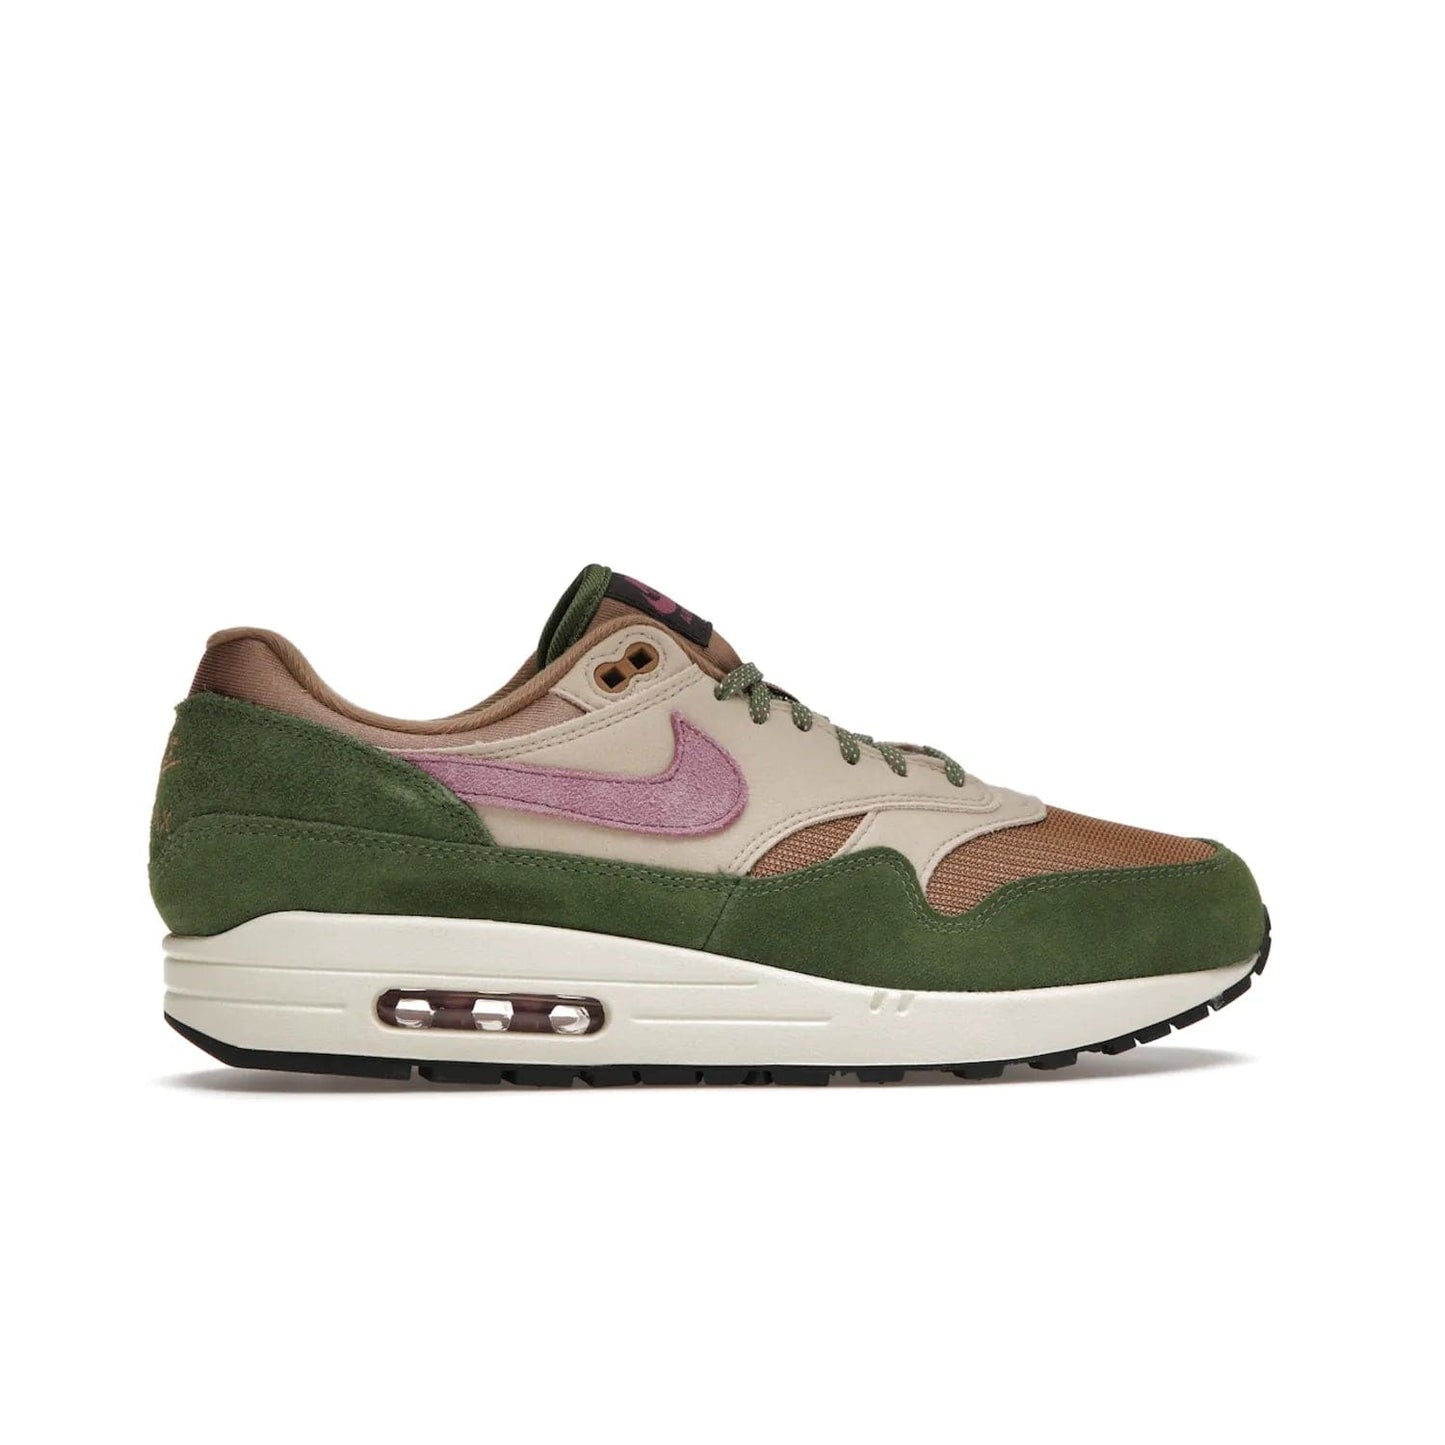 Nike Air Max 1 SH Treeline - Image 36 - Only at www.BallersClubKickz.com - A classic Nike Air Max 1 SH Treeline with a brown mesh upper, taupe Durabuck overlays, and hairy green suede details. Light Bordeaux Swoosh and woven tongue label for a pop of color. Released in May 2022. Perfect for any outfit and sure to impress.